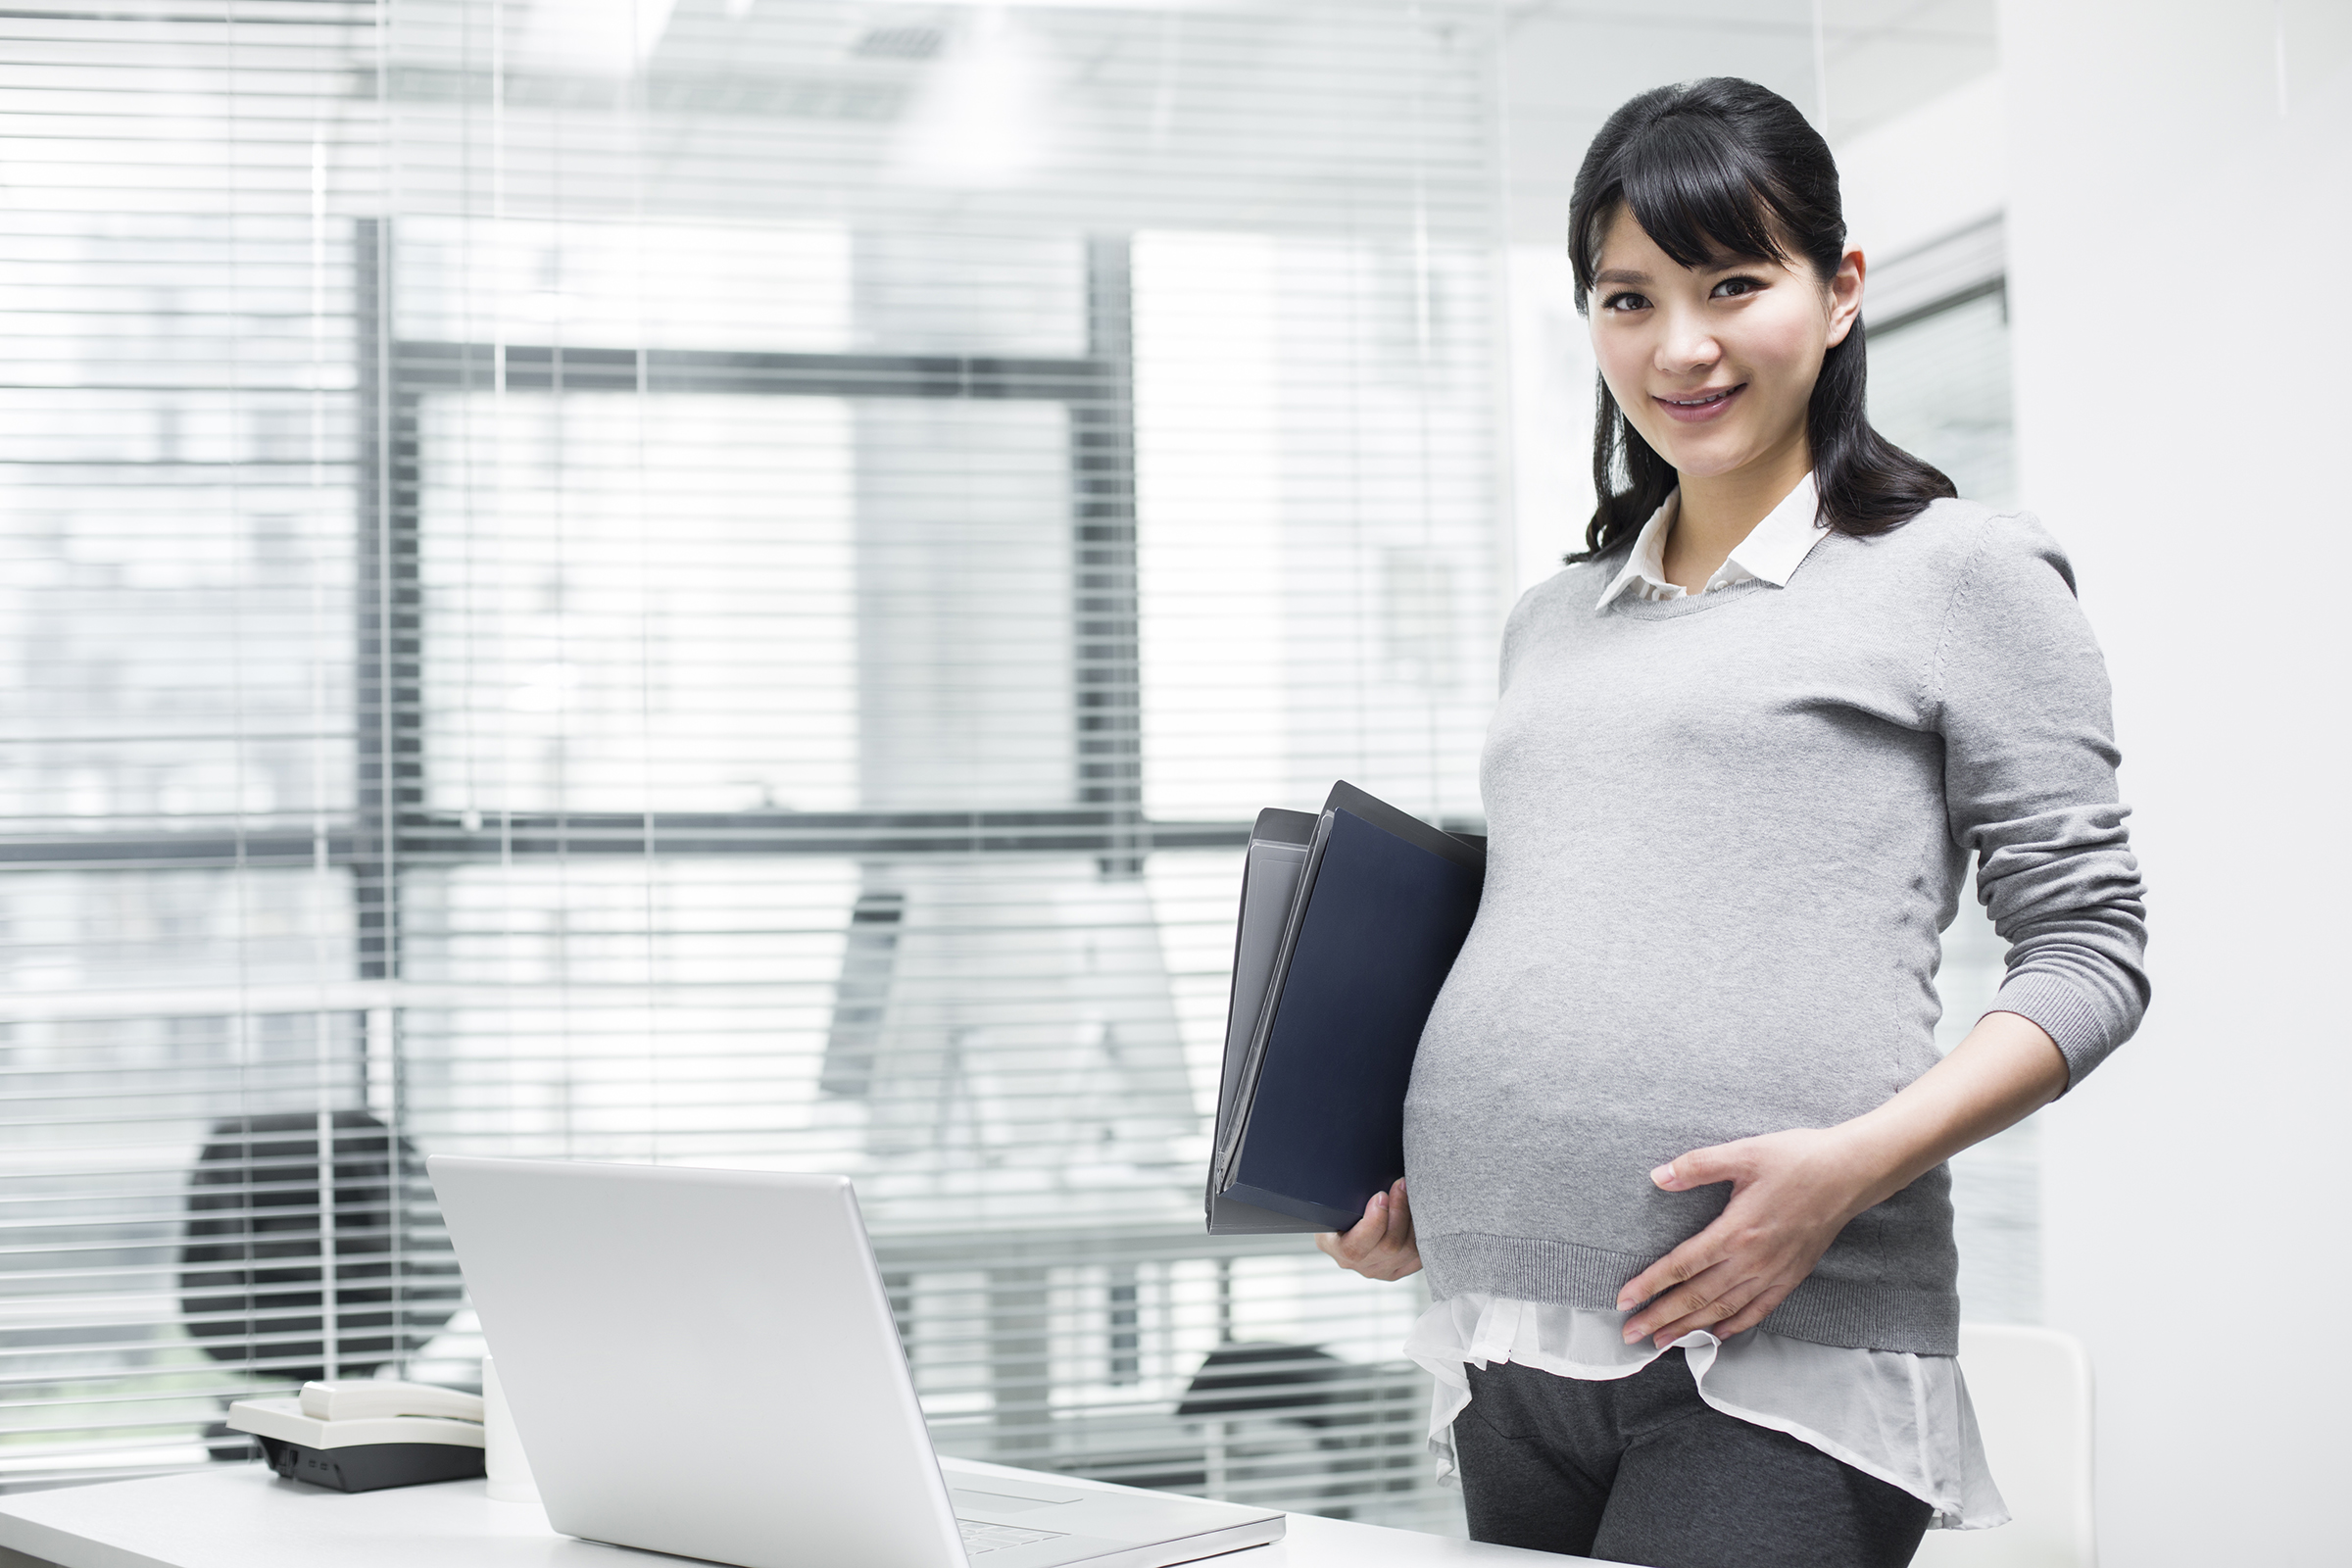 LEGAL UPDATE: Reasonable Accommodations under the Pregnant Workers Fairness Act